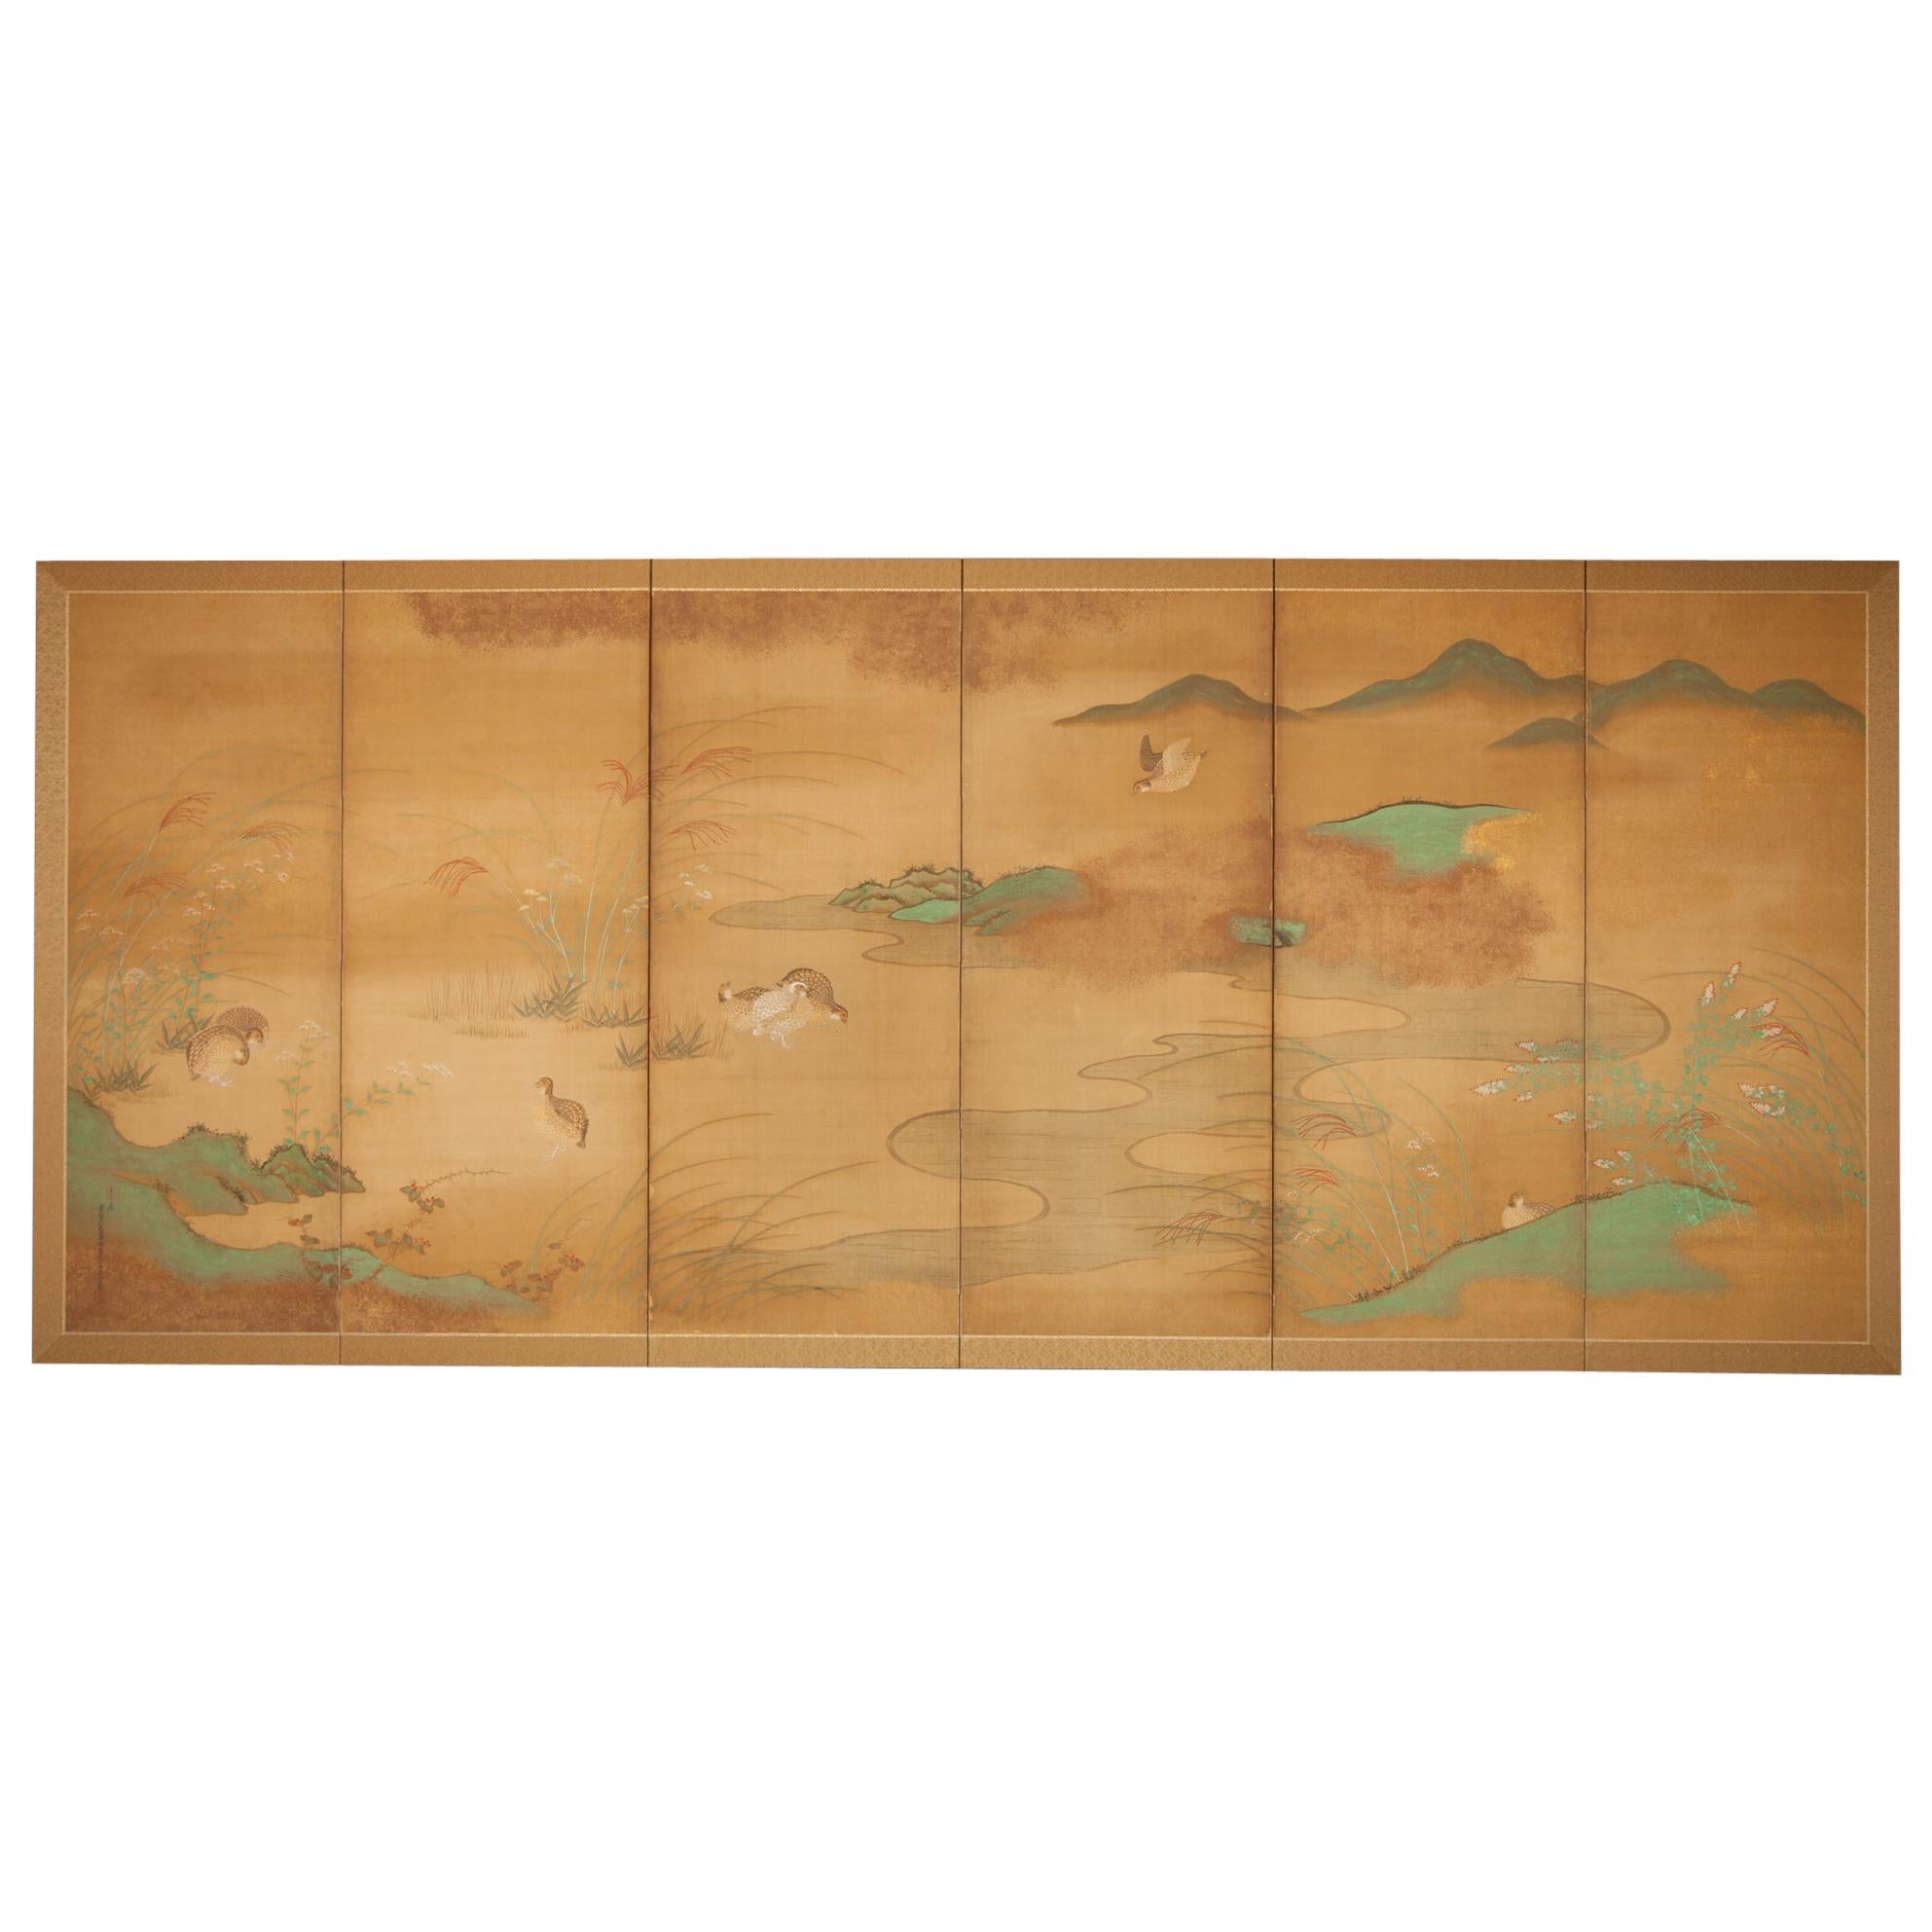 Japanese Six Panel Screen, Quails in a Gentle Landscape